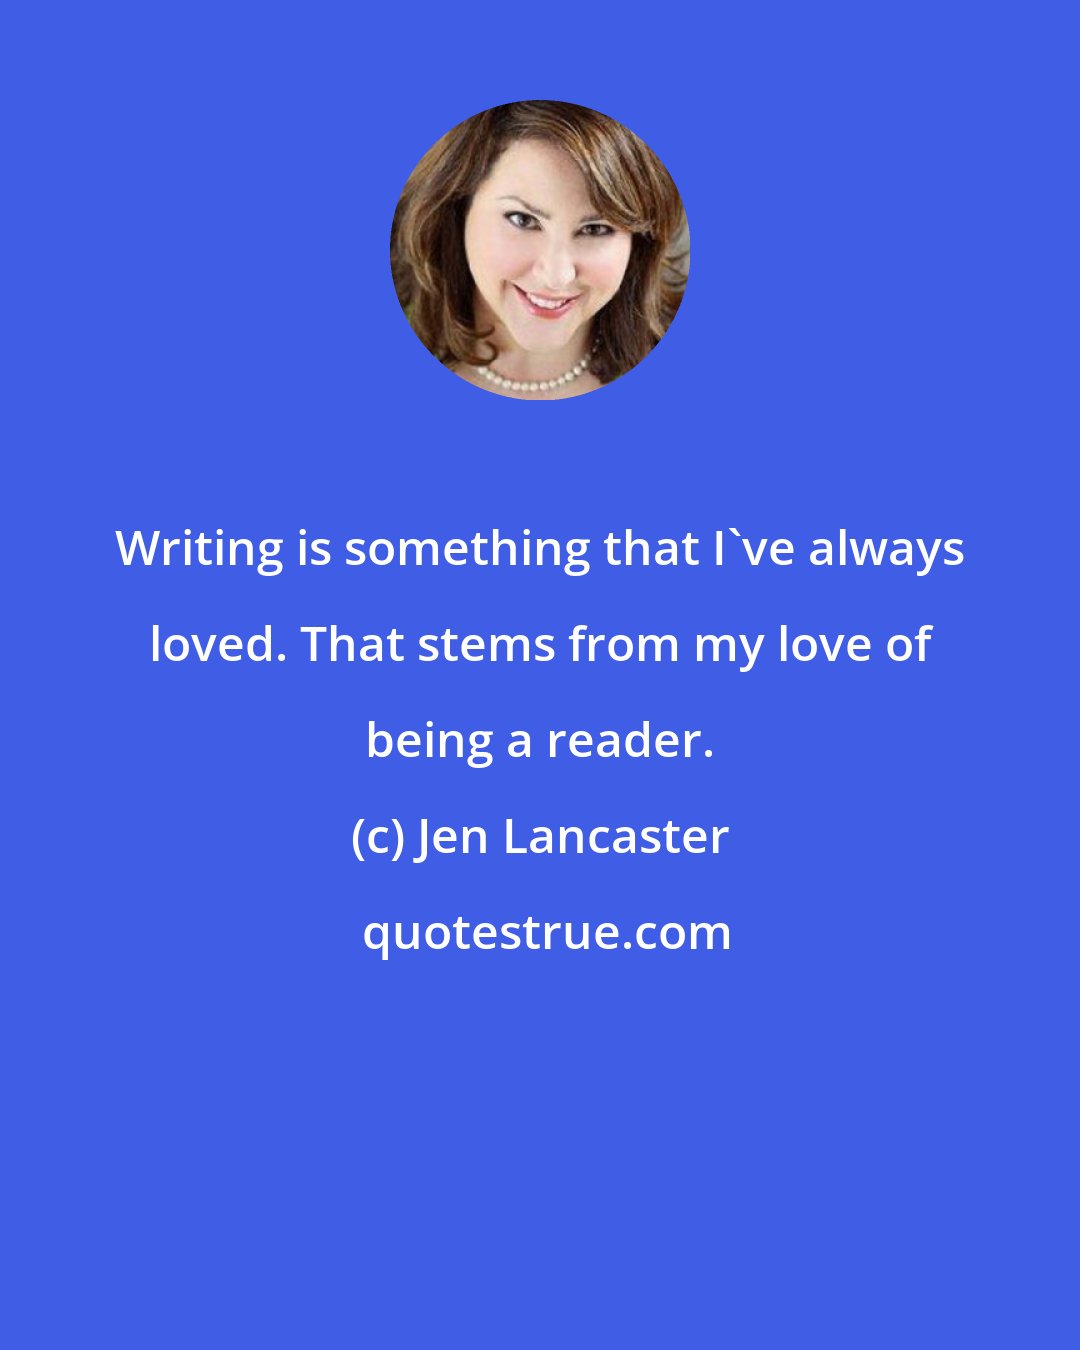 Jen Lancaster: Writing is something that I've always loved. That stems from my love of being a reader.